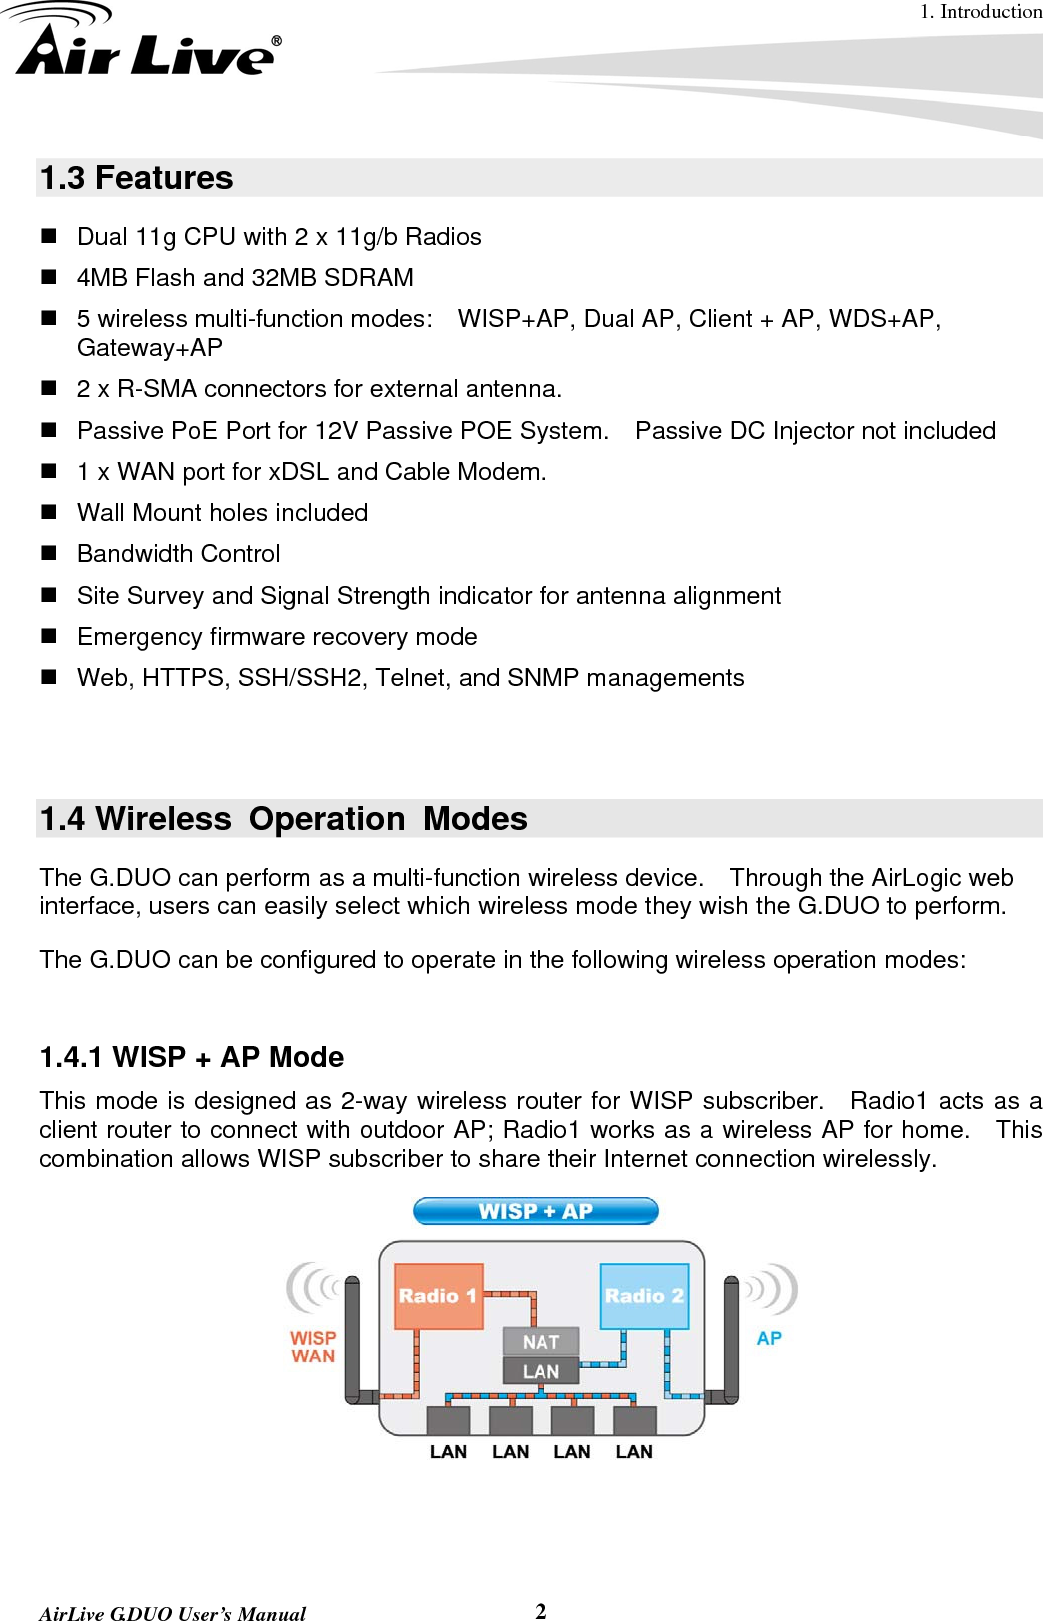 1. Introduction  AirLive G.DUO User’s Manual  21.3 Features   Dual 11g CPU with 2 x 11g/b Radios   4MB Flash and 32MB SDRAM   5 wireless multi-function modes:    WISP+AP, Dual AP, Client + AP, WDS+AP, Gateway+AP   2 x R-SMA connectors for external antenna.   Passive PoE Port for 12V Passive POE System.    Passive DC Injector not included   1 x WAN port for xDSL and Cable Modem.   Wall Mount holes included  Bandwidth Control   Site Survey and Signal Strength indicator for antenna alignment   Emergency firmware recovery mode   Web, HTTPS, SSH/SSH2, Telnet, and SNMP managements   1.4 Wireless Operation Modes The G.DUO can perform as a multi-function wireless device.    Through the AirLogic web interface, users can easily select which wireless mode they wish the G.DUO to perform.   The G.DUO can be configured to operate in the following wireless operation modes:    1.4.1 WISP + AP Mode This mode is designed as 2-way wireless router for WISP subscriber.    Radio1 acts as a client router to connect with outdoor AP; Radio1 works as a wireless AP for home.    This combination allows WISP subscriber to share their Internet connection wirelessly.       